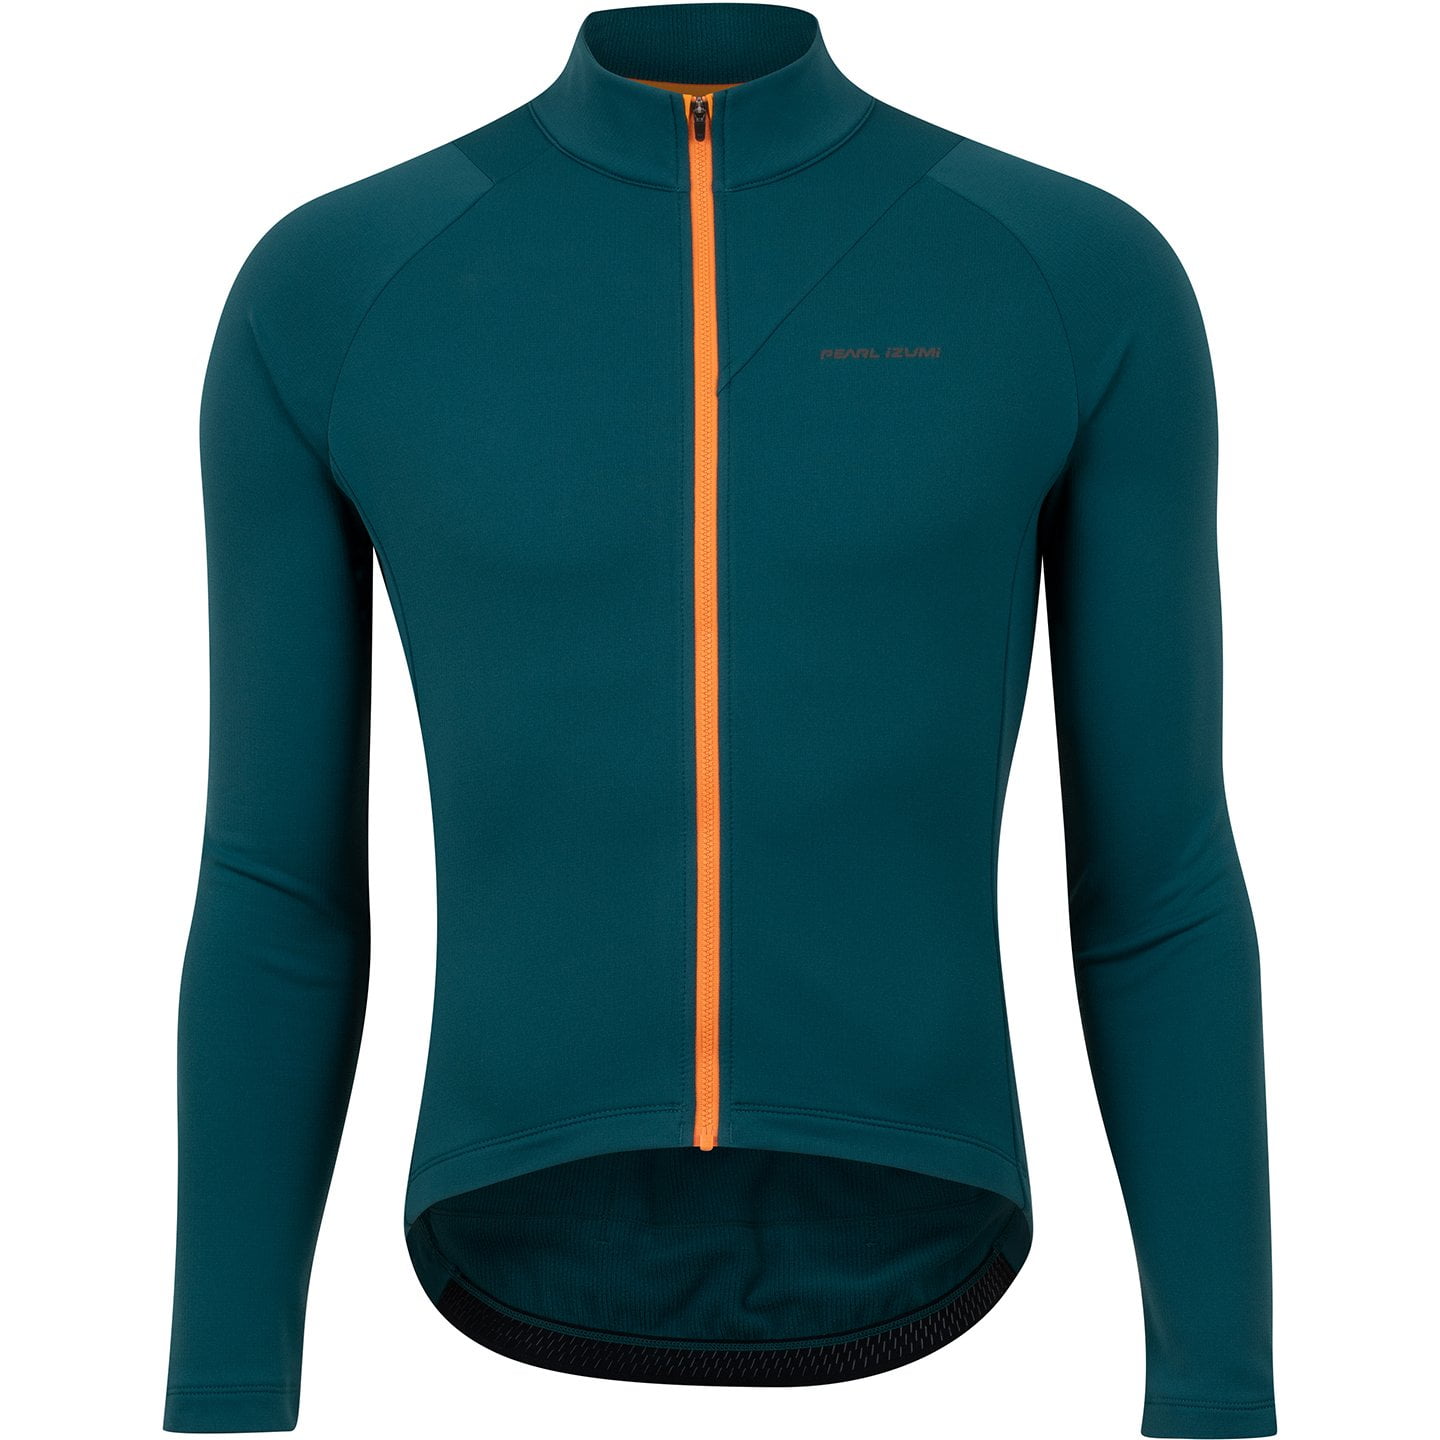 PEARL IZUMI Attack Thermal Long Sleeve Jersey Long Sleeve Jersey, for men, size L, Cycling jersey, Cycling clothing